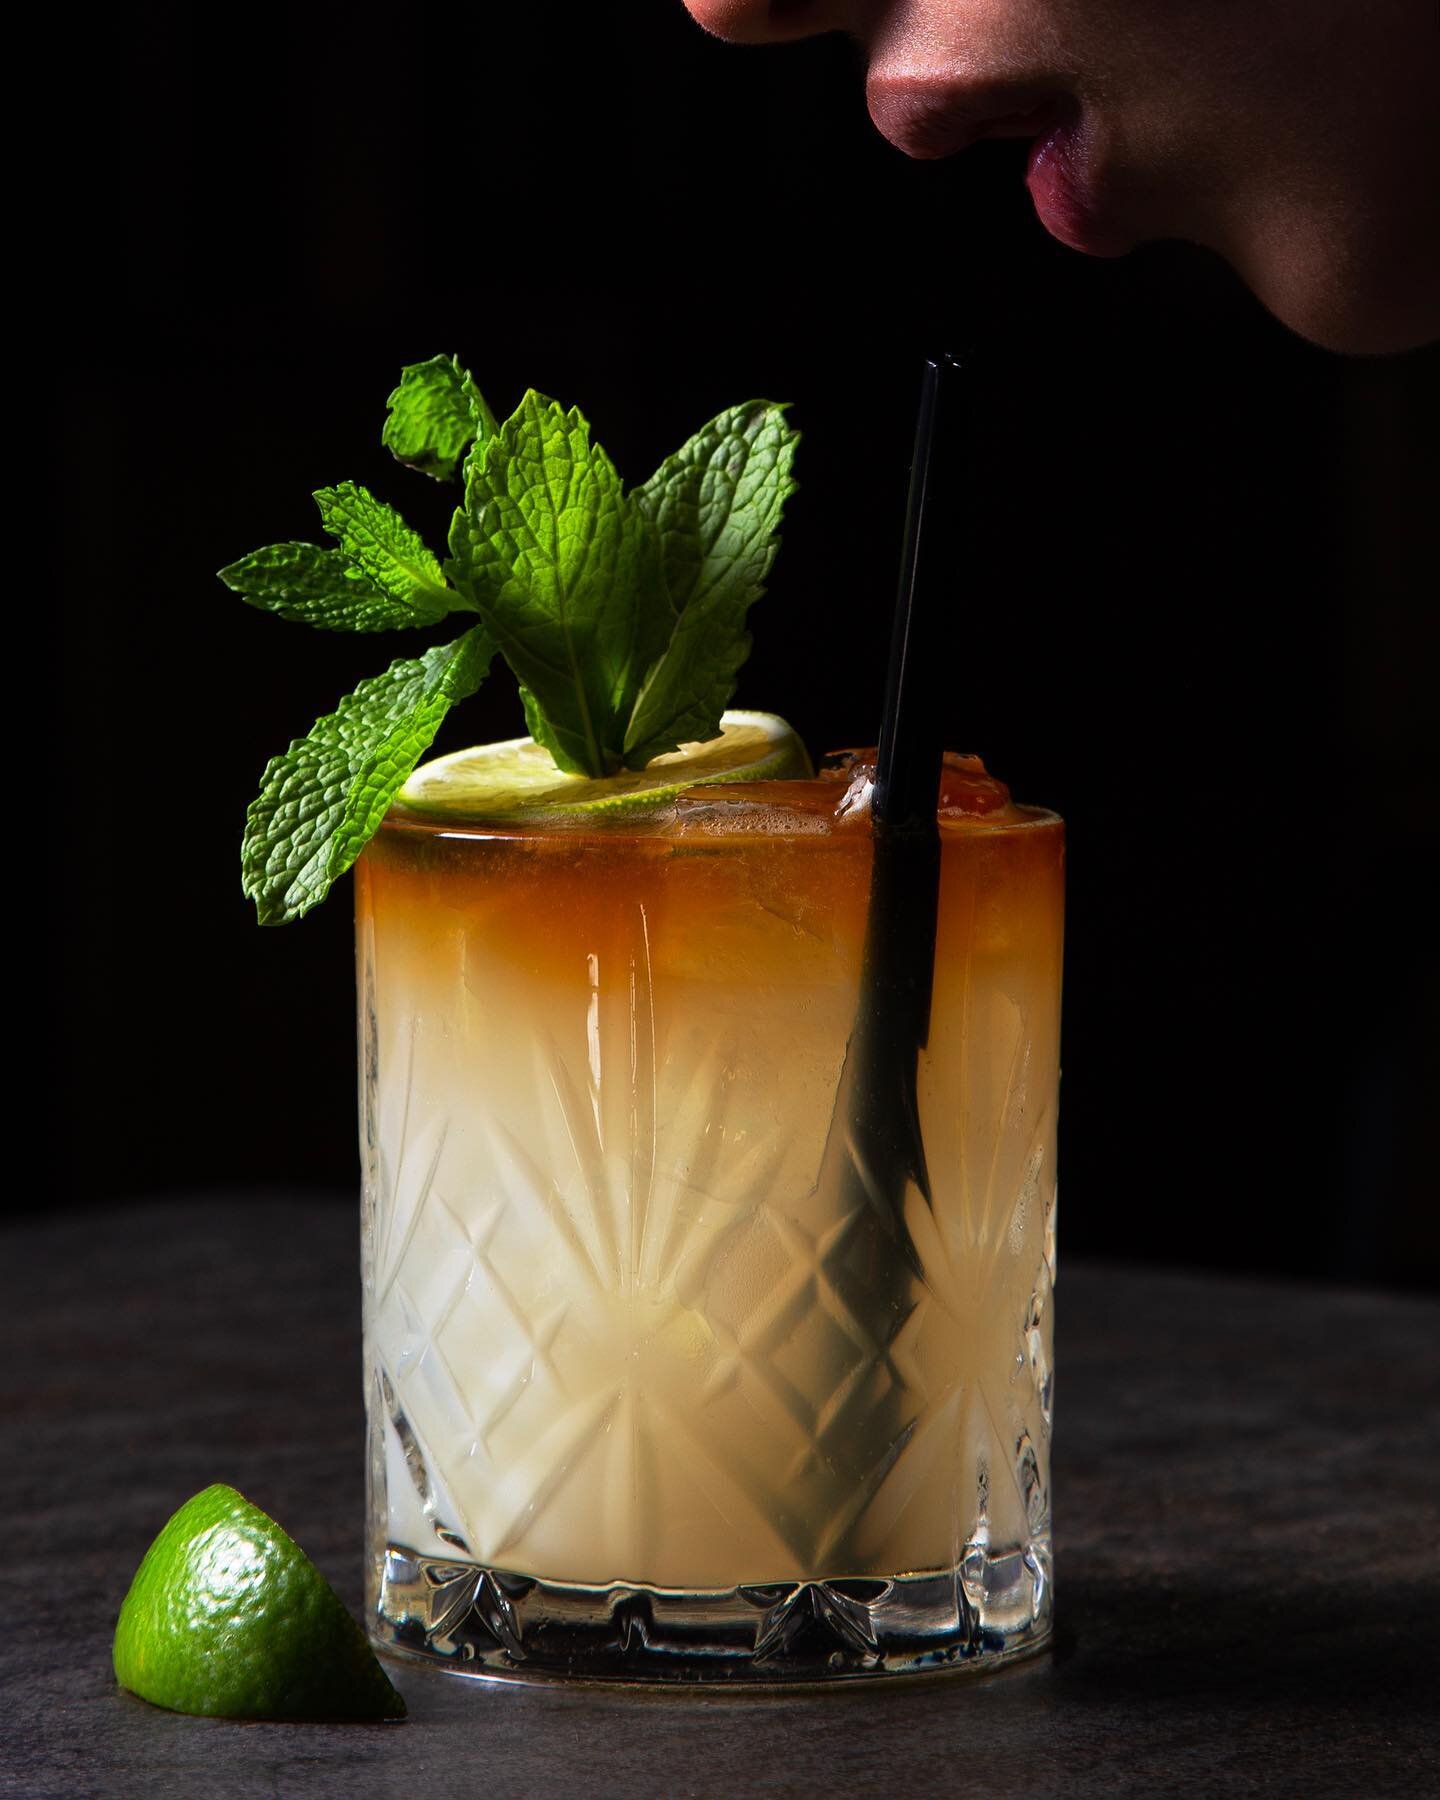 Lean in for an unforgettable sip of our Mexican Mai Tai 🫦

With gustoso blanco y a&ntilde;ejado rums, dry Cura&ccedil;ao, orgeat, lime @gustosorum @icuracao_usa 

#craftcocktails #maitai #bartender #cocktail #maitaid #mixology #ladrinks #sips #drink